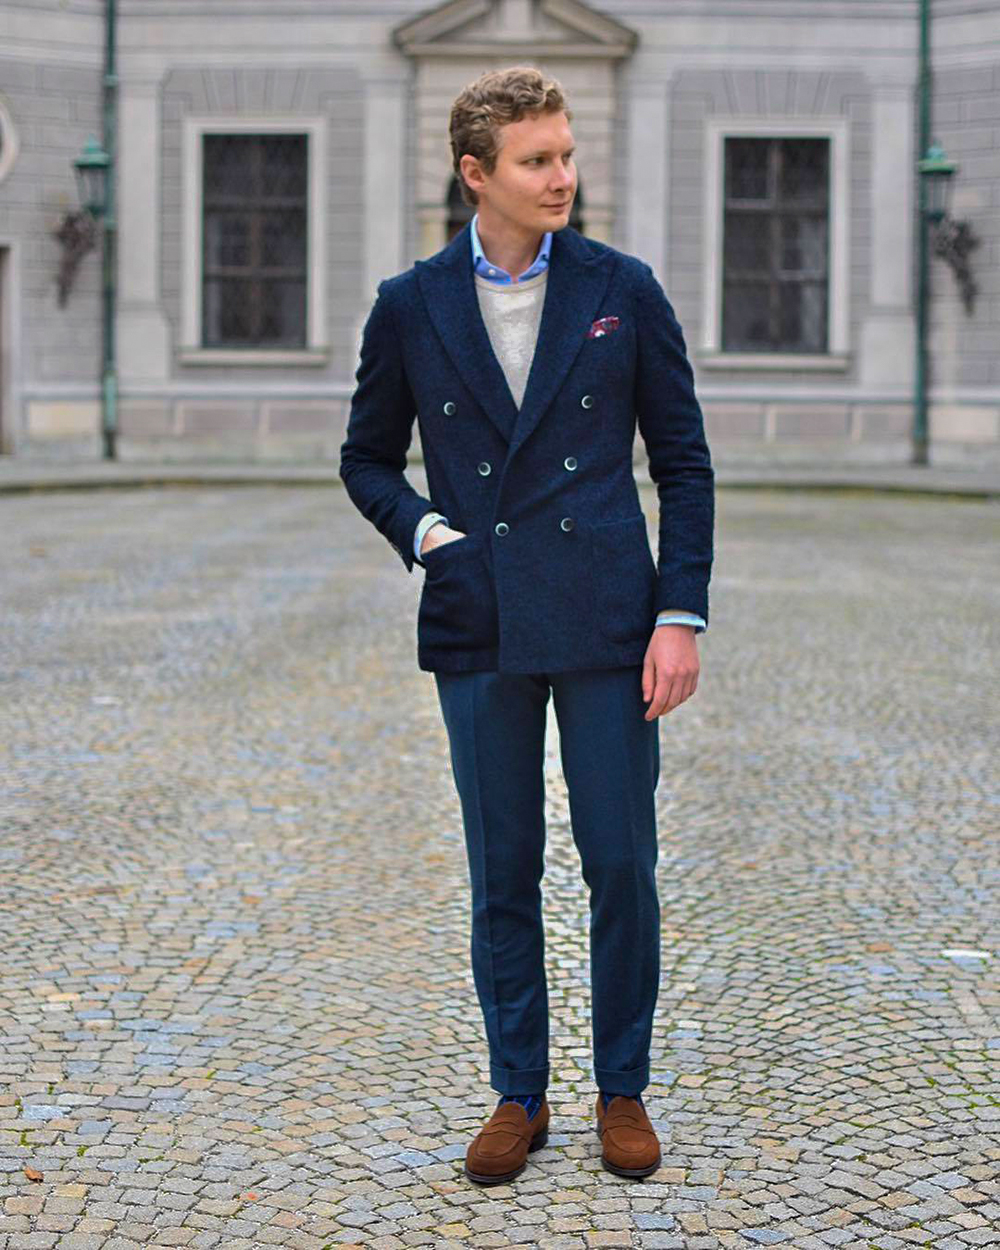 Double-breasted blazer, crew neck sweater, dress shirt, and suede loafers outfit